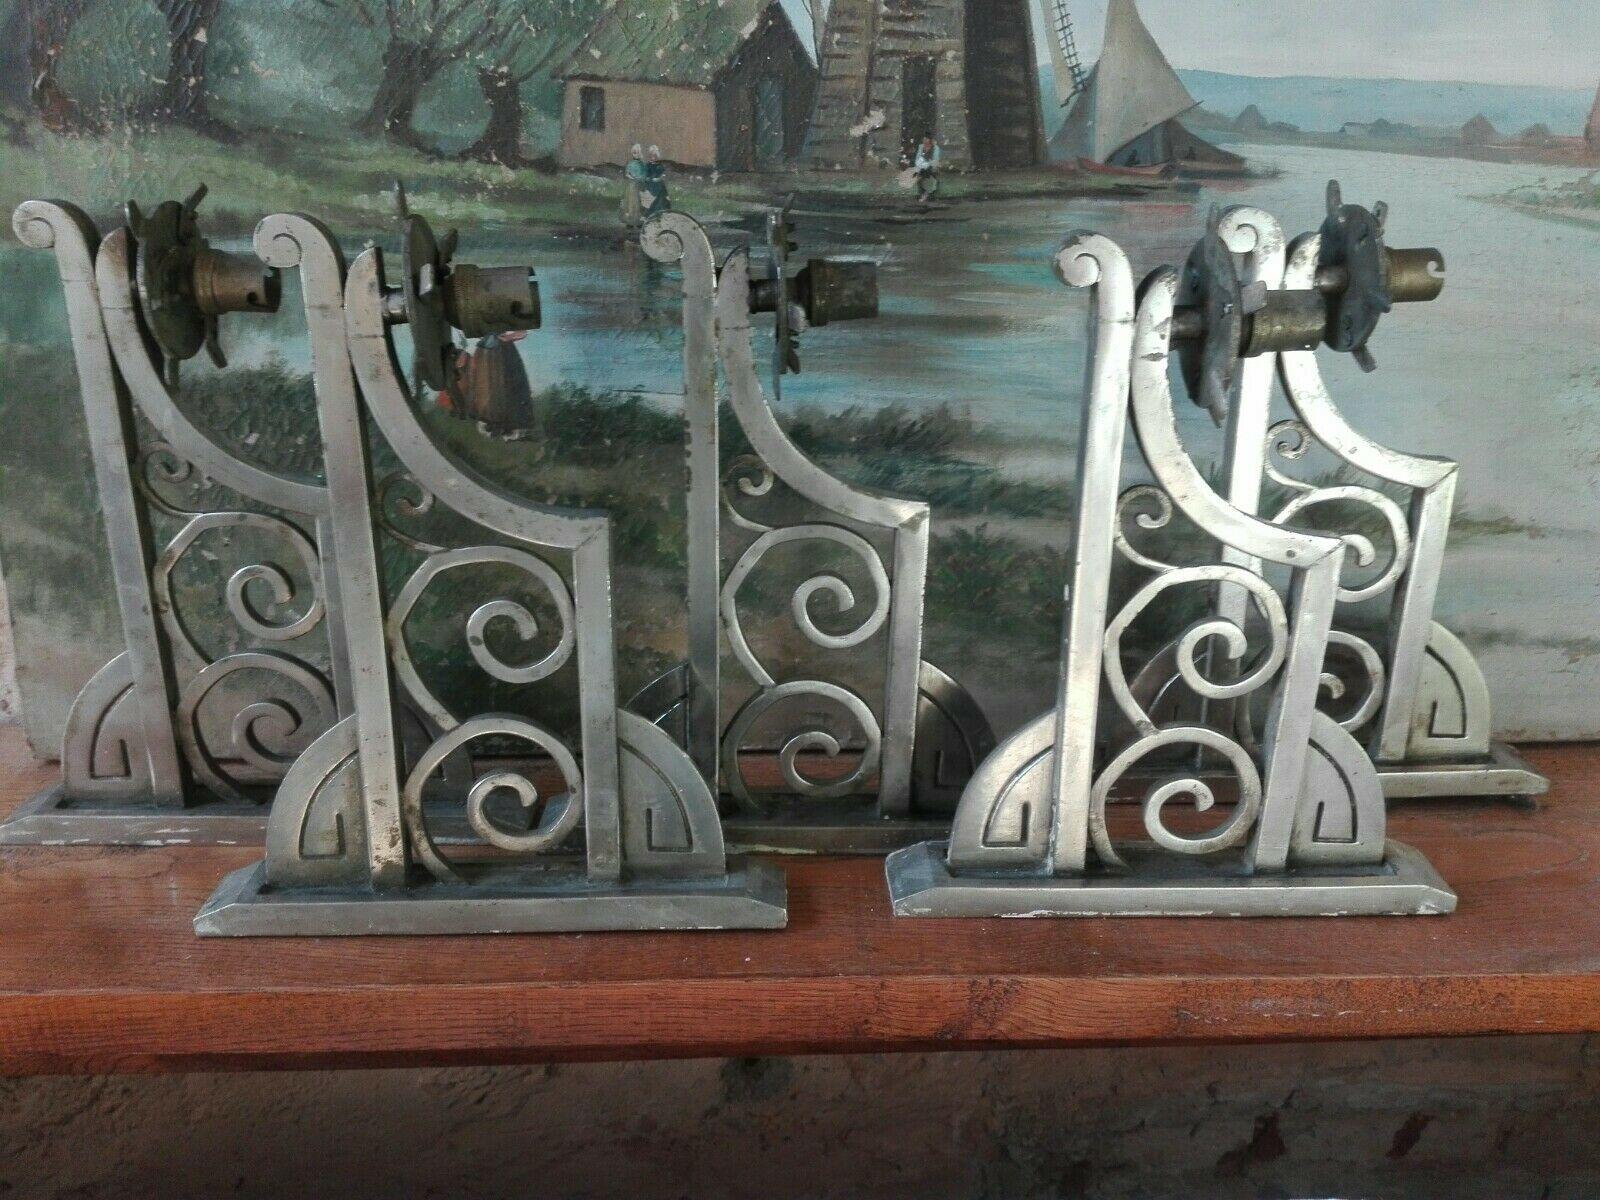 1920's Set of 5 Matching French Art Deco Nickel Wall Sconces. The design on these sconces is classic French Art Deco.